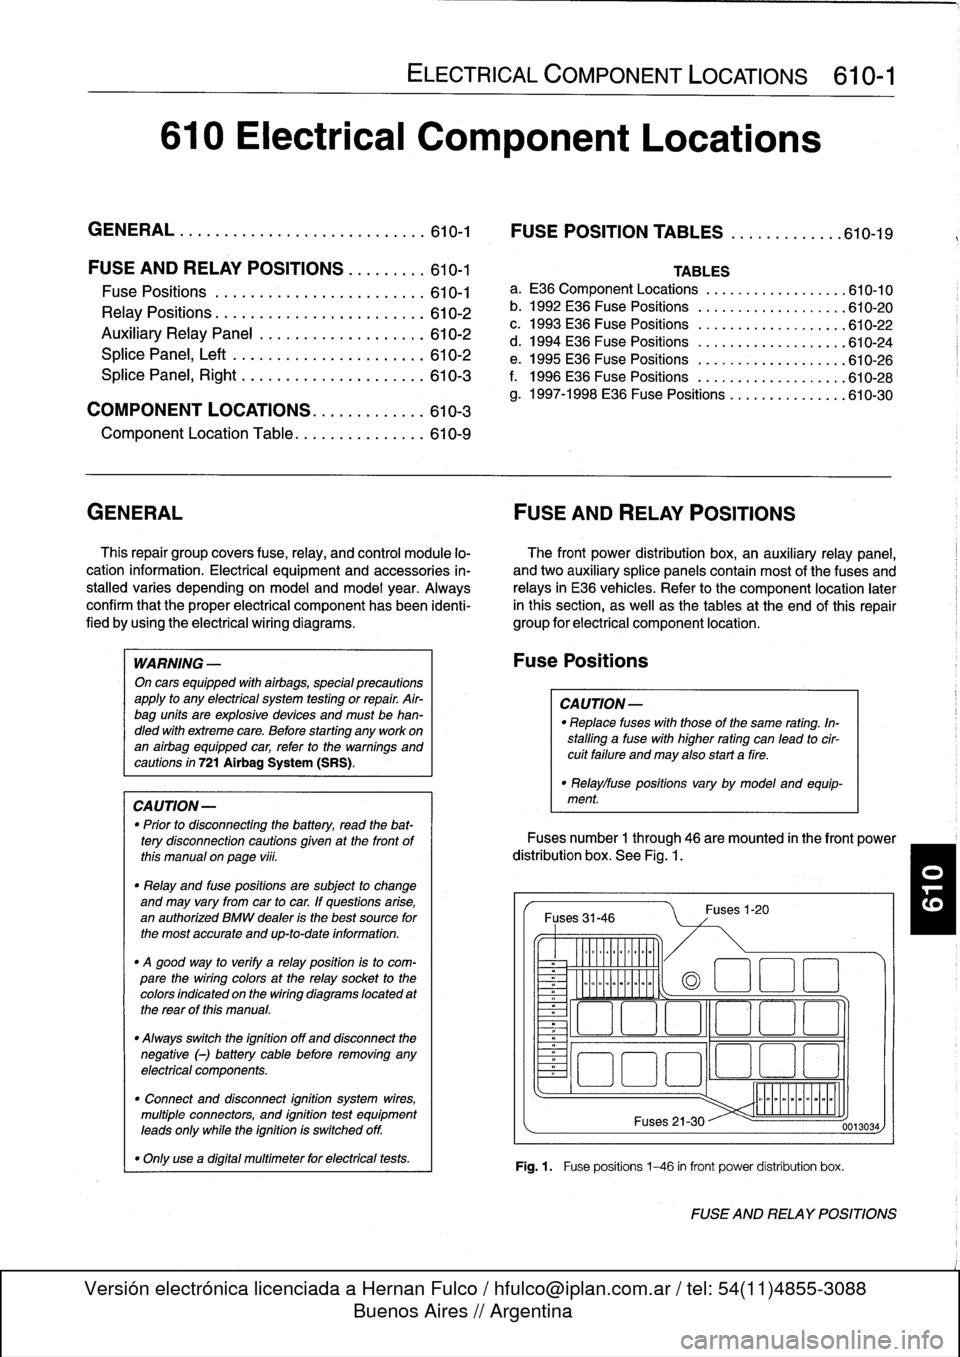 BMW 318i 1998 E36 Workshop Manual 
610
Electrical
Component
Locations

GENERAL
...........
.
.
.
.
.
.
.
.
.
........
610-1

	

FOSE
POSITION
TABLES
..
.
.
.
.
.
.....
.
610-19

FUSE
AND
RELAY
POSITIONS
.
...
.
.
.
.
.
610-1

Fuse
Pos